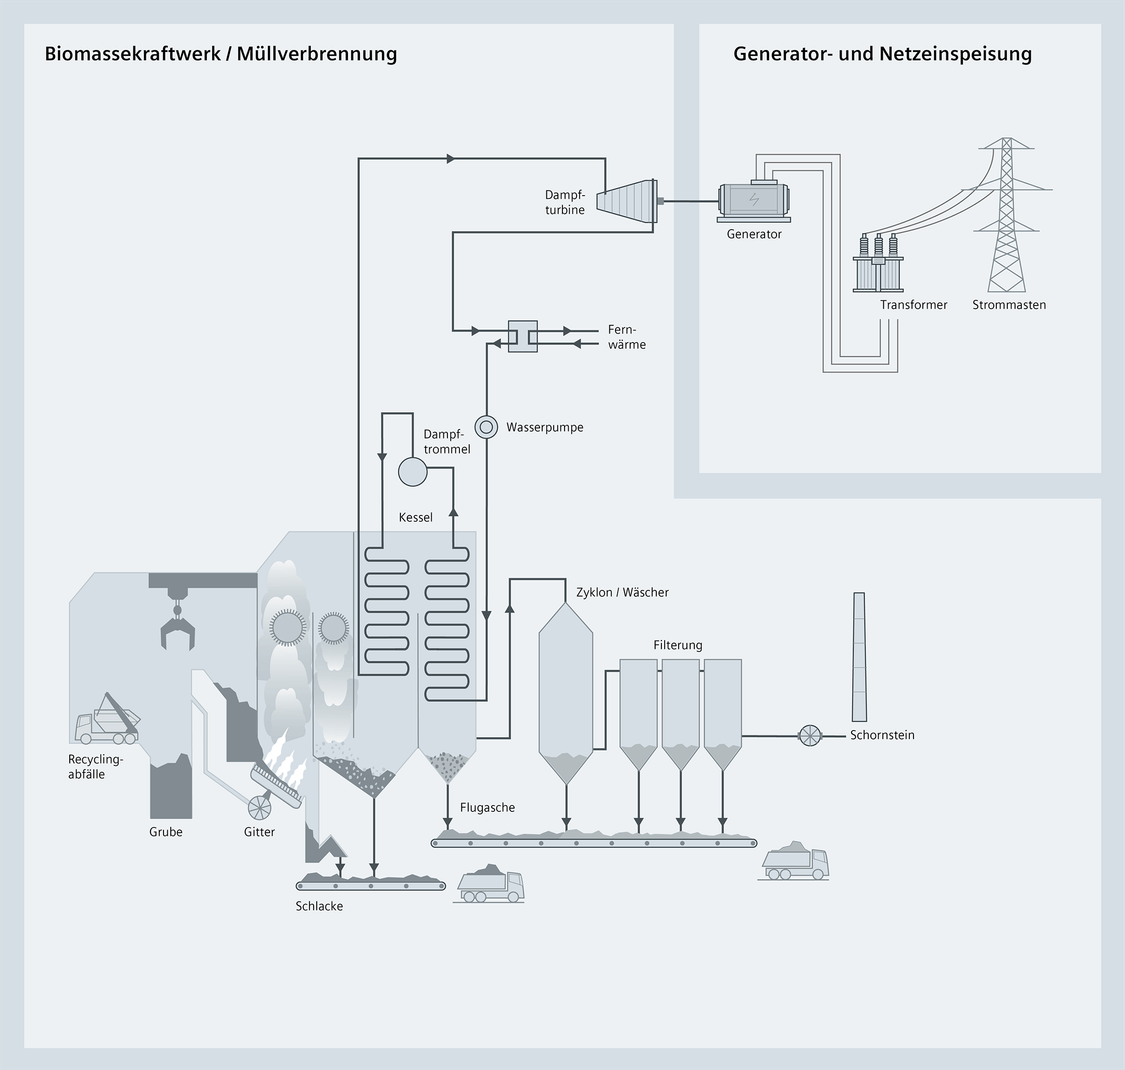 A schematic illustration of processes in biomass power plants